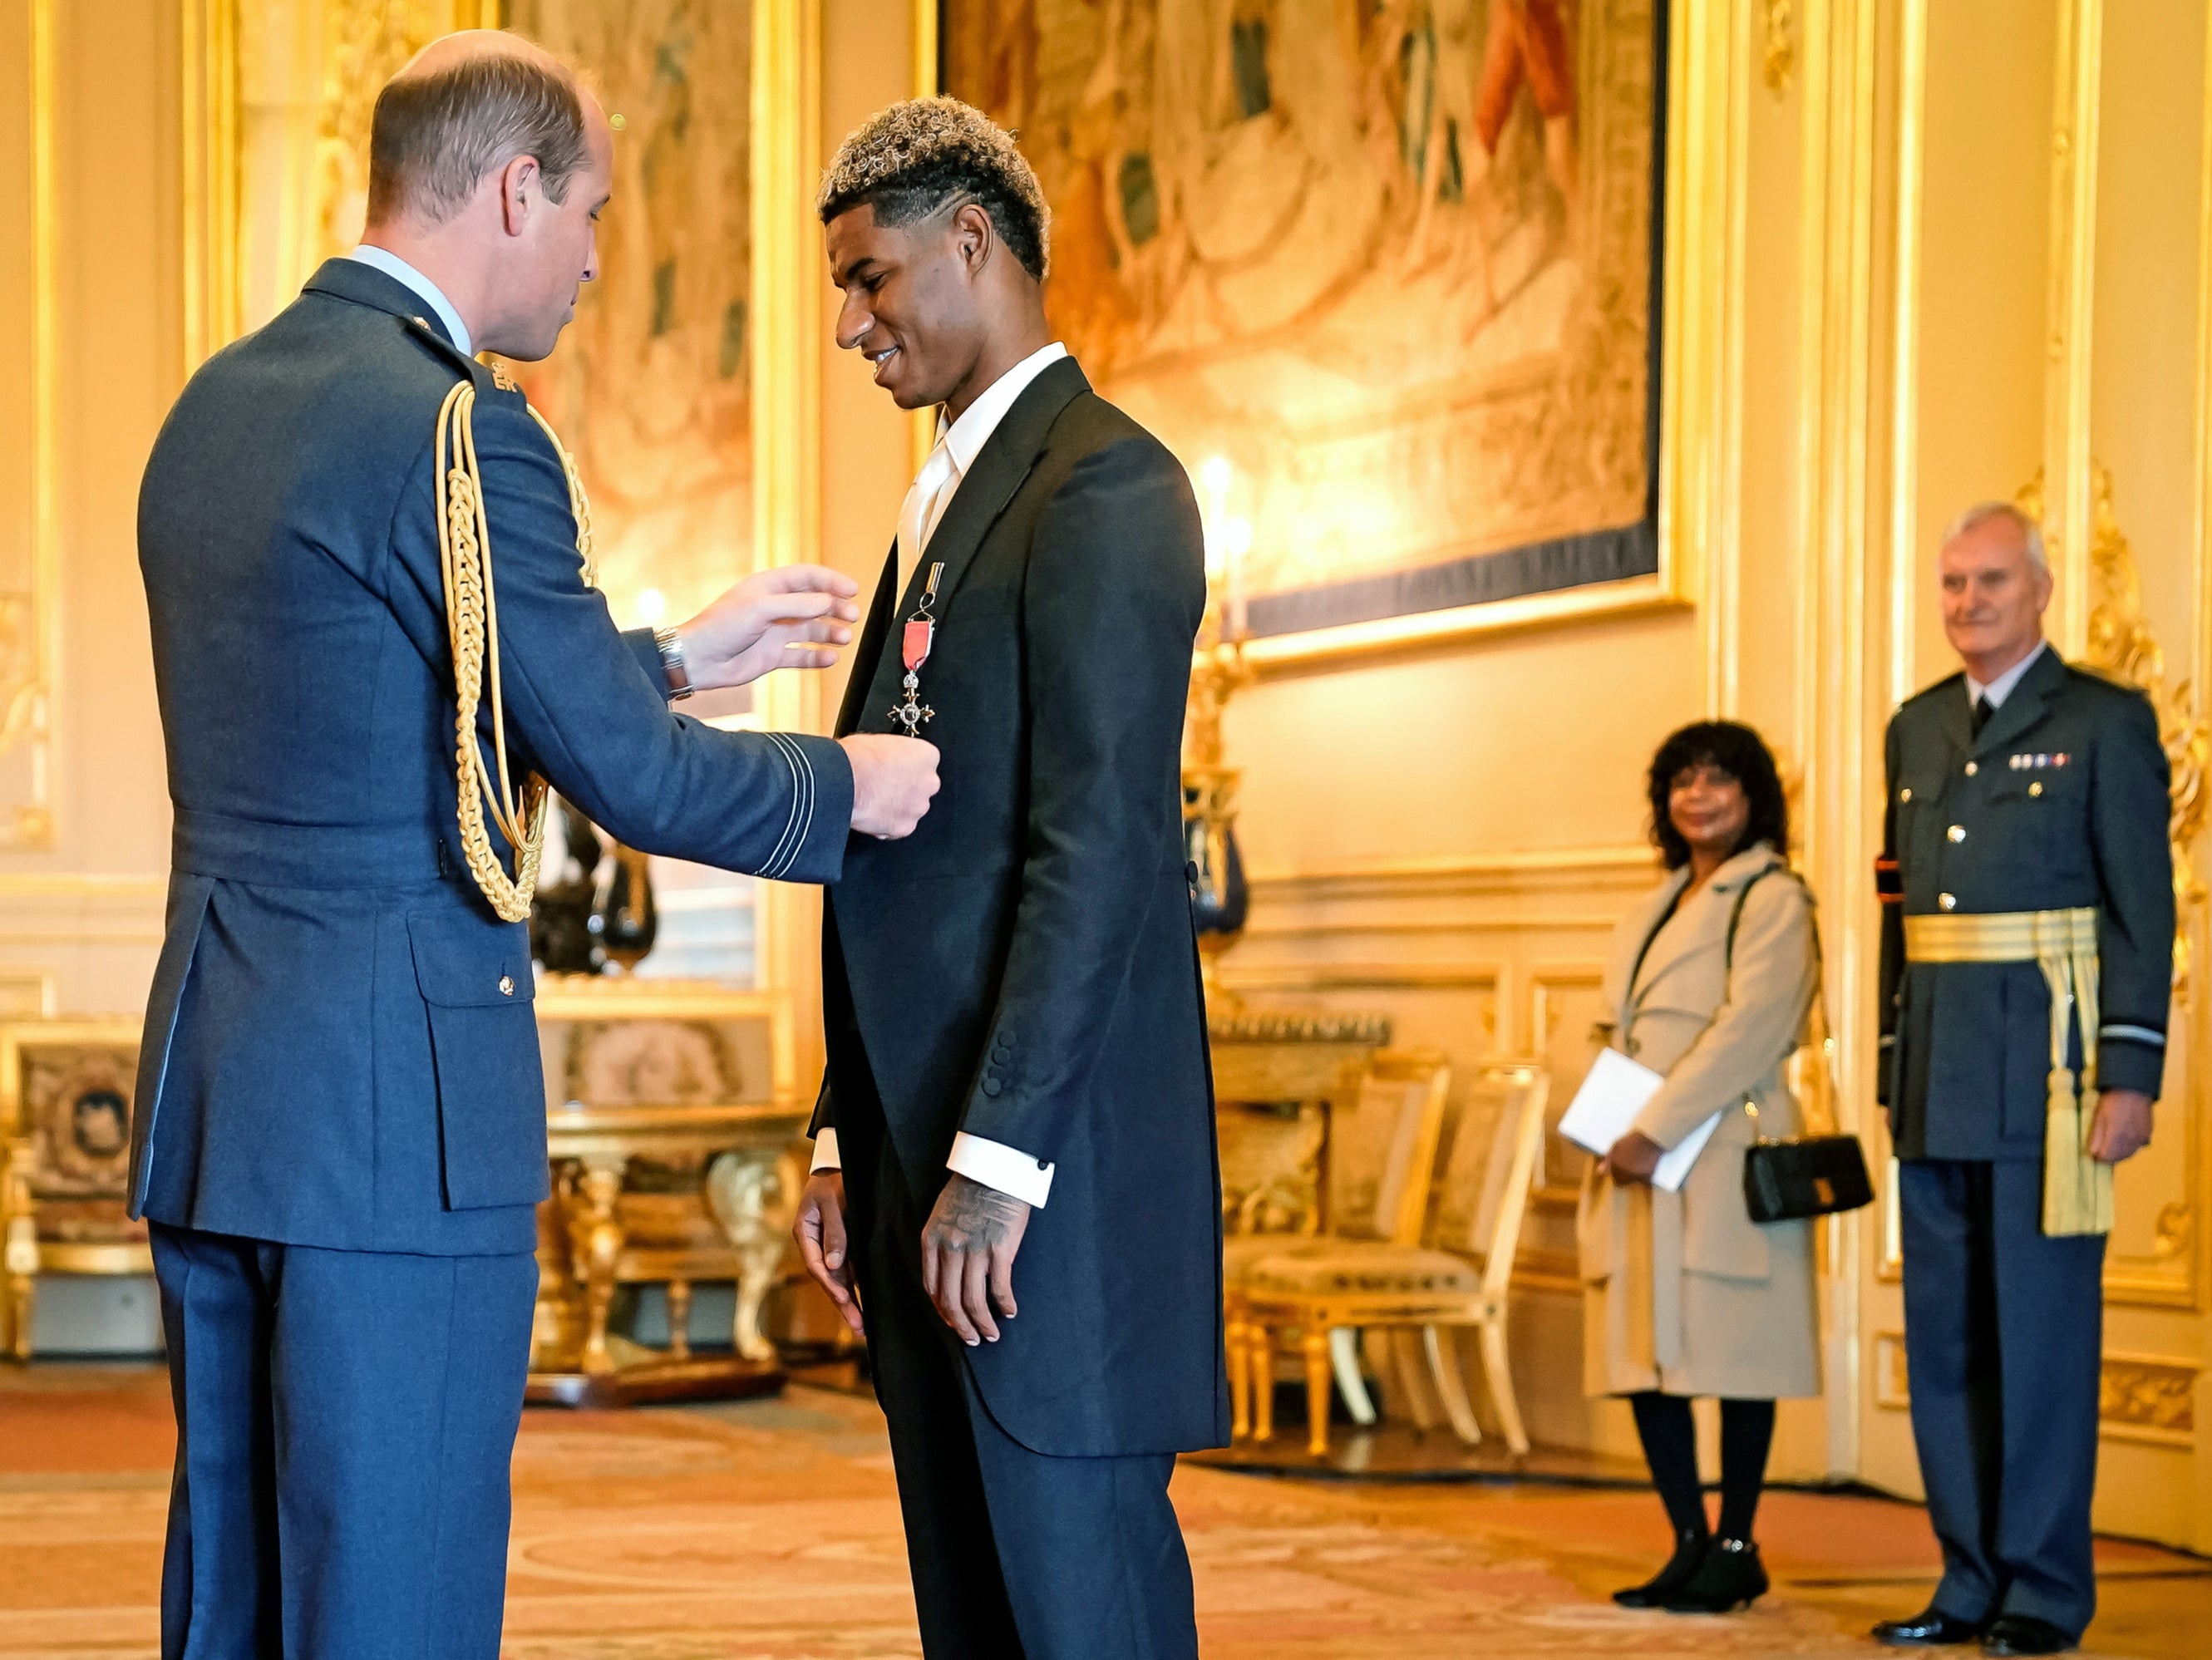 Marcus Rashford is awarded his MBE by Prince William at Windsor Castle